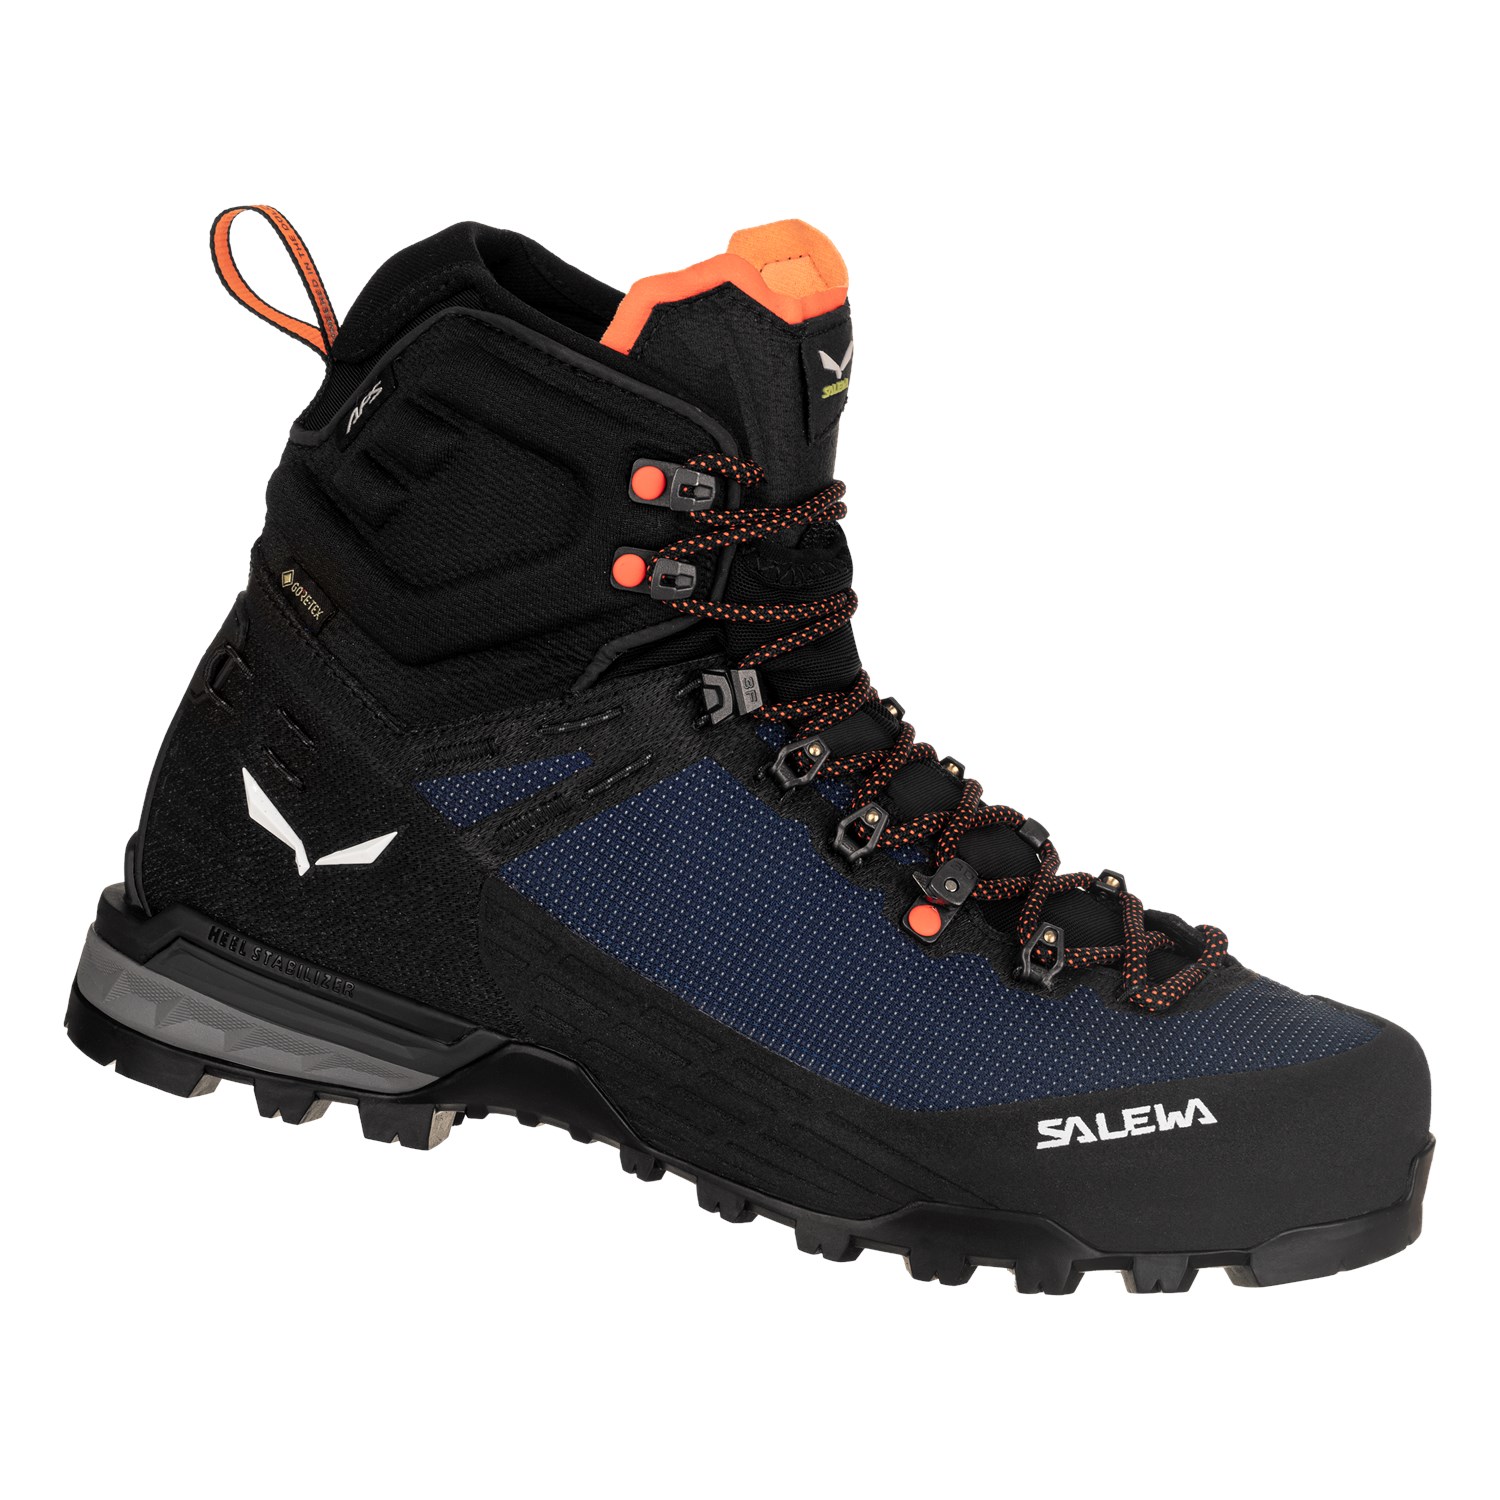 SALEWA Hiking Shoes & Boots for Men for sale